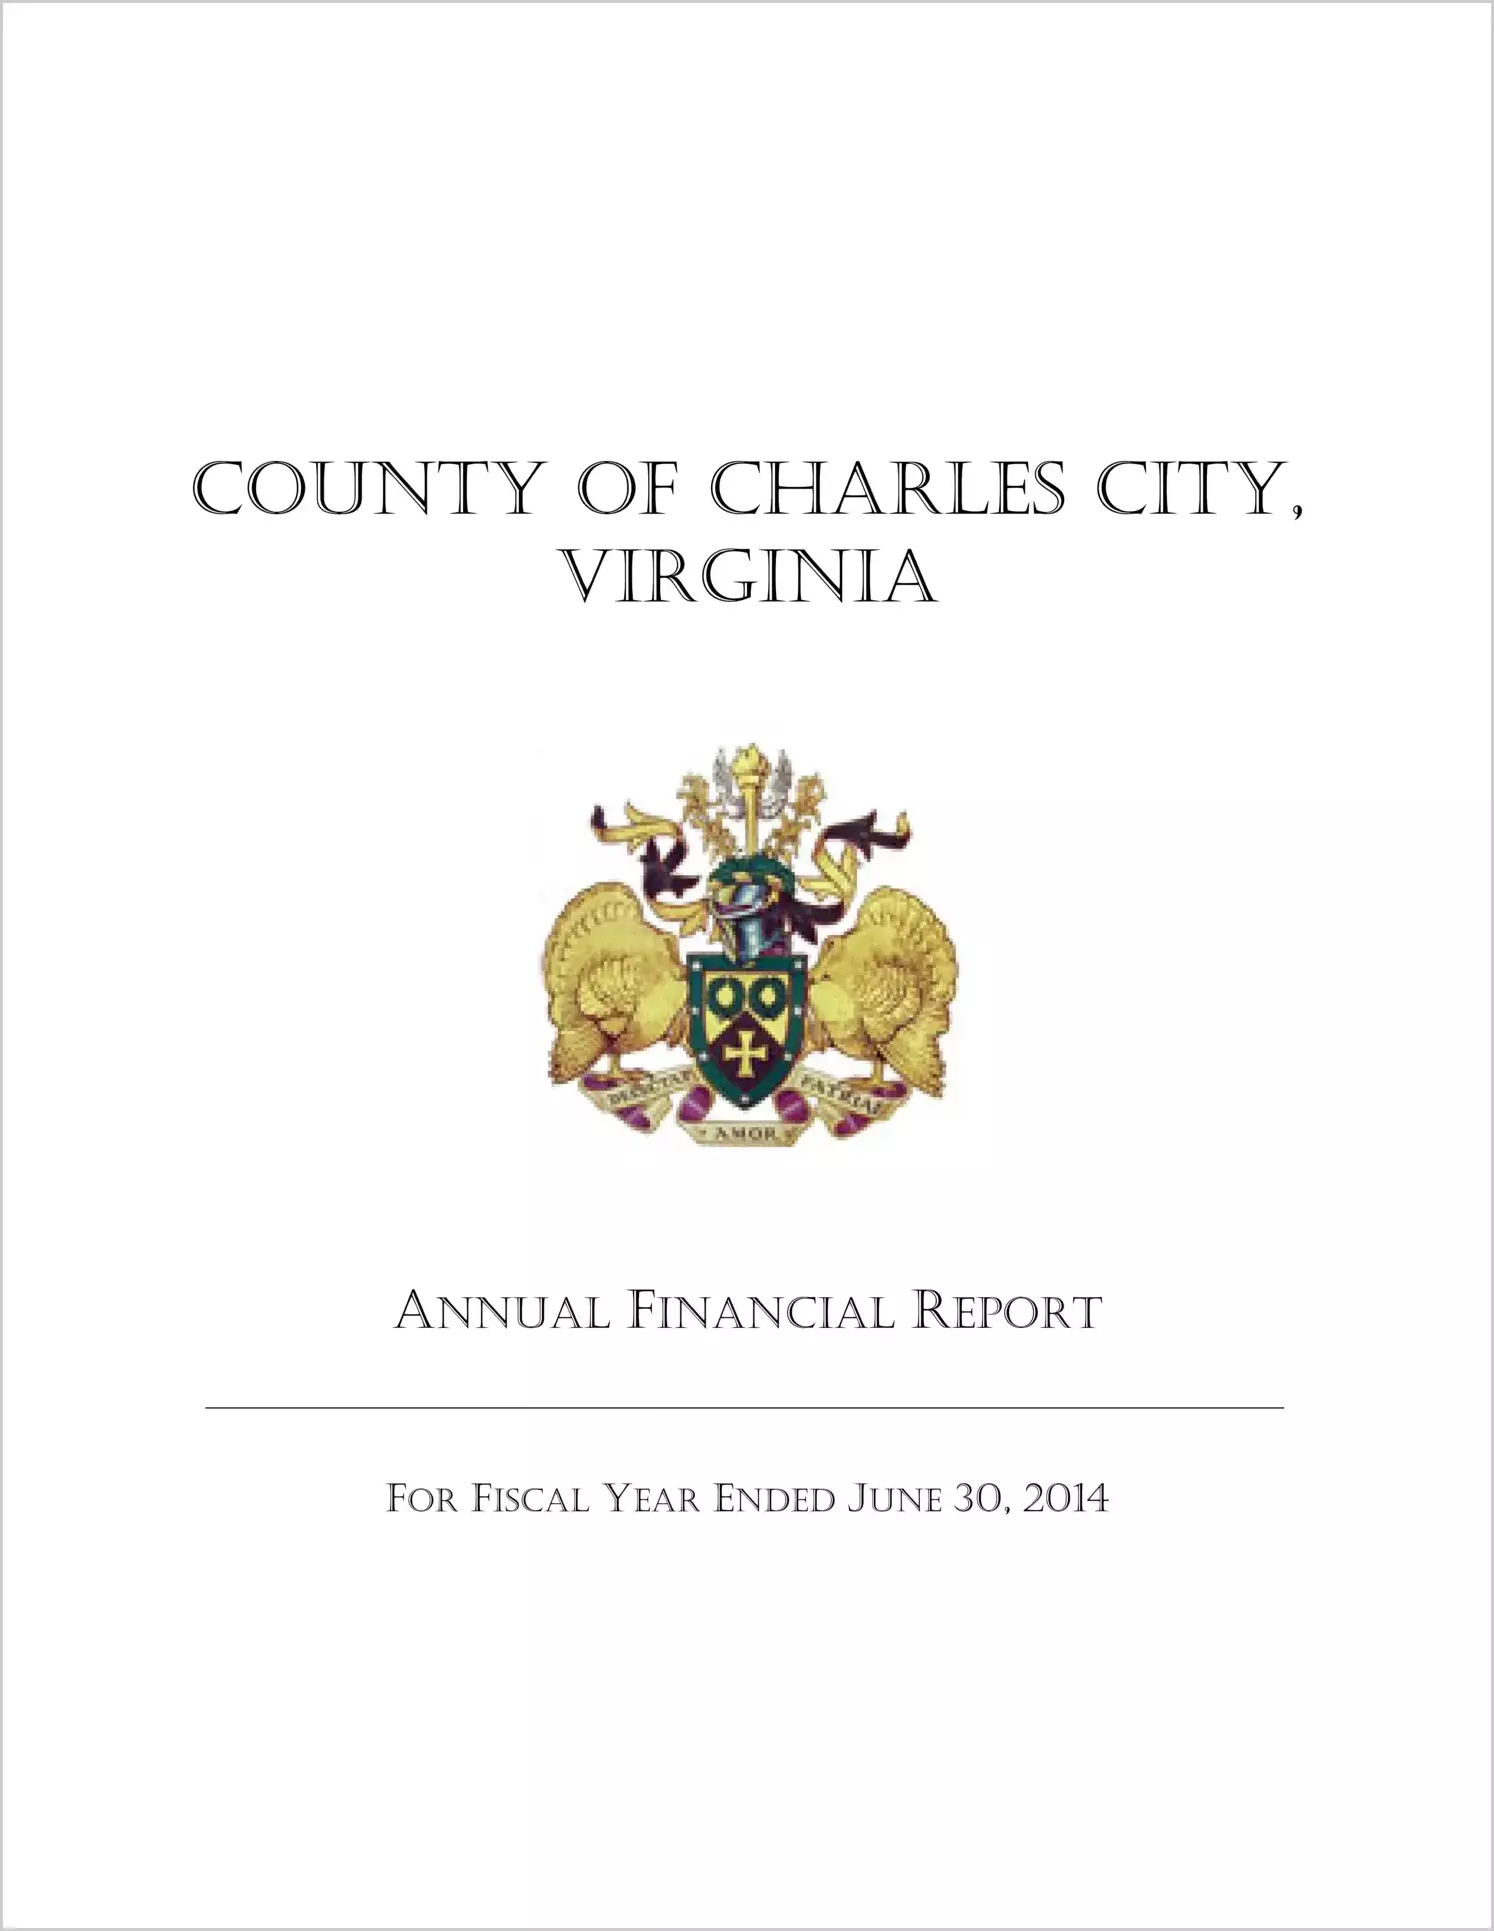 2014 Annual Financial Report for County of Charles City